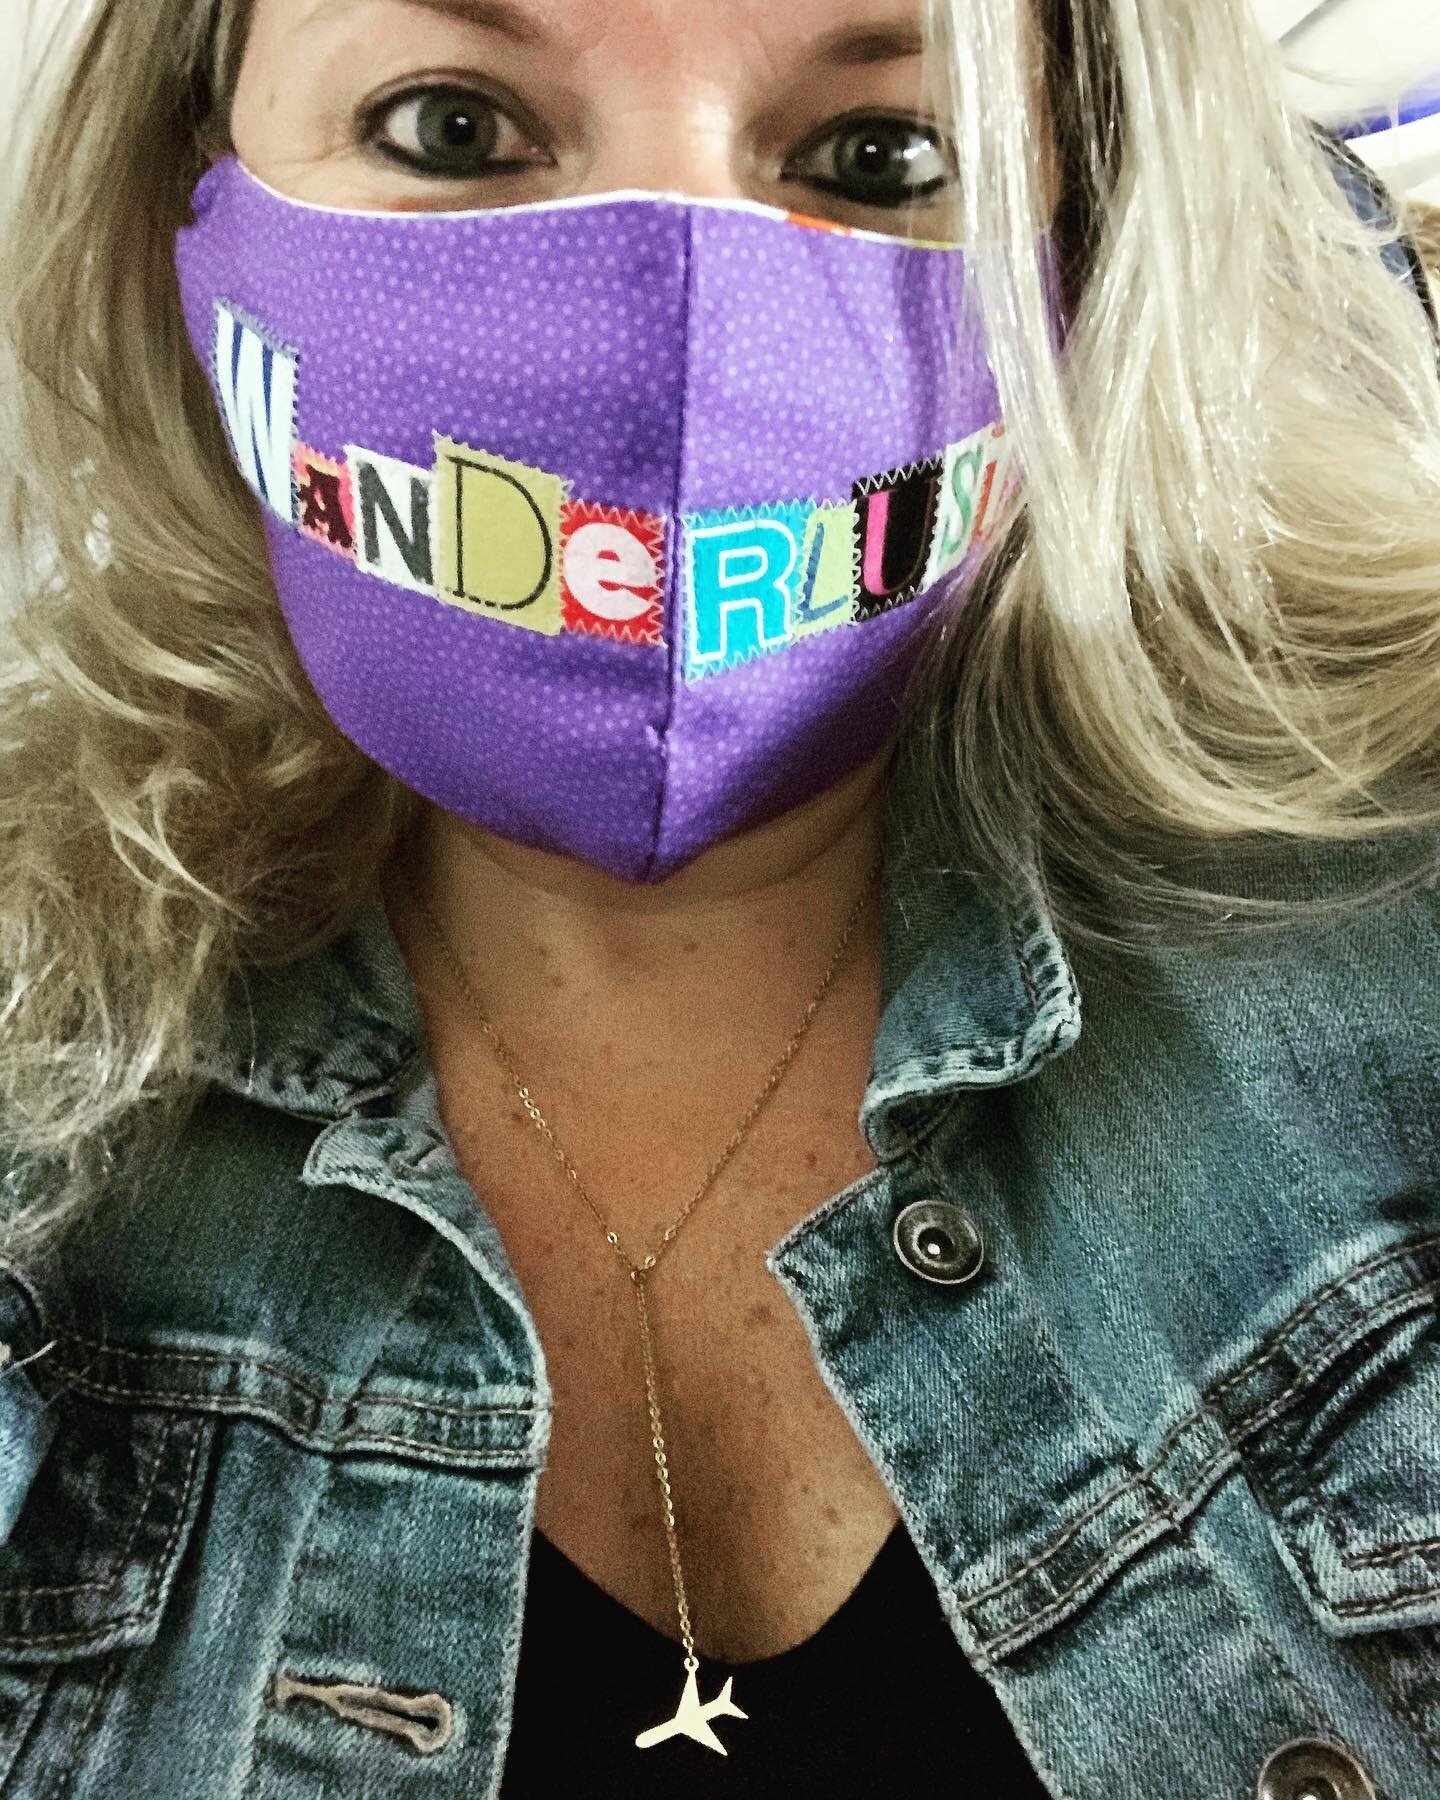 When you&rsquo;re so excited to finally travel again that you put on every travel-themed item you own &mdash; wanderlust mask ✅ airplane necklace ✅ boarding sign messenger bag ✅ &mdash; and then take pictures out the window like it&rsquo;s your first